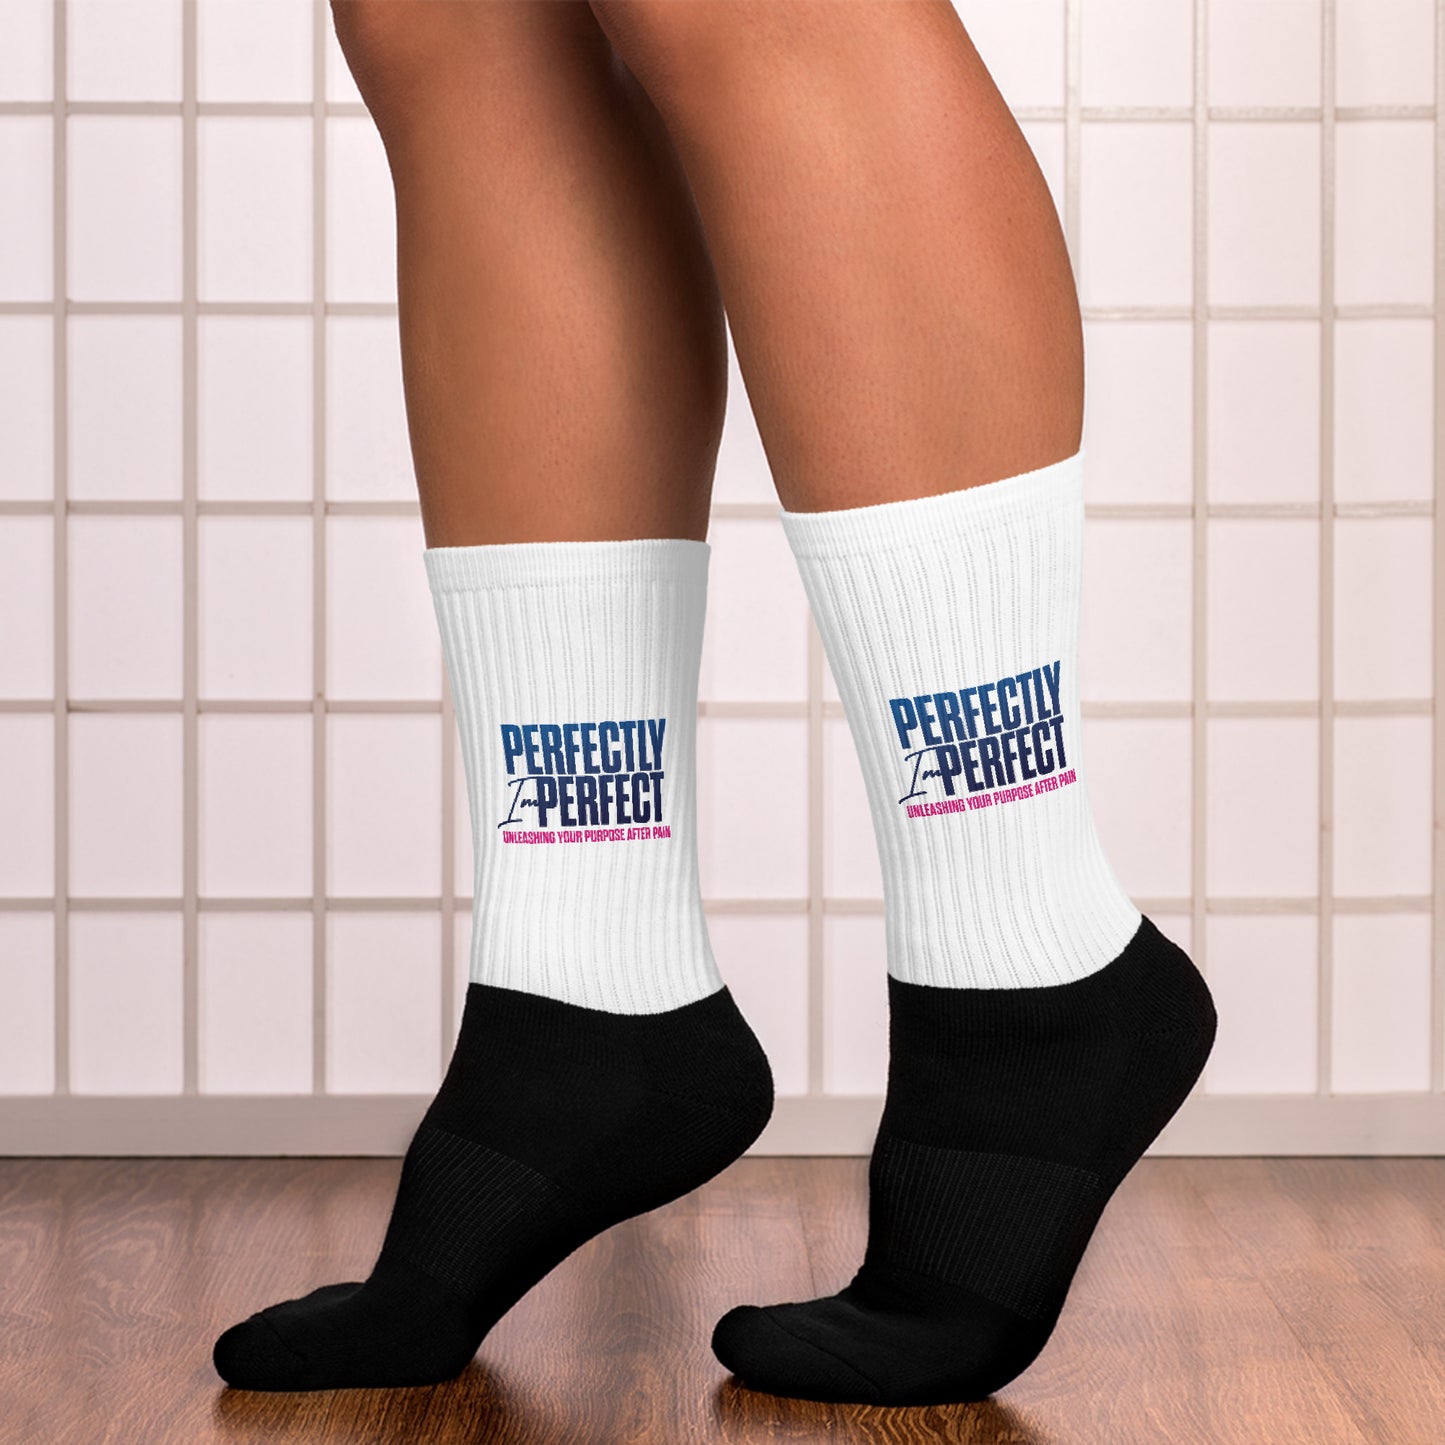 Perfectly Imperfect Socks